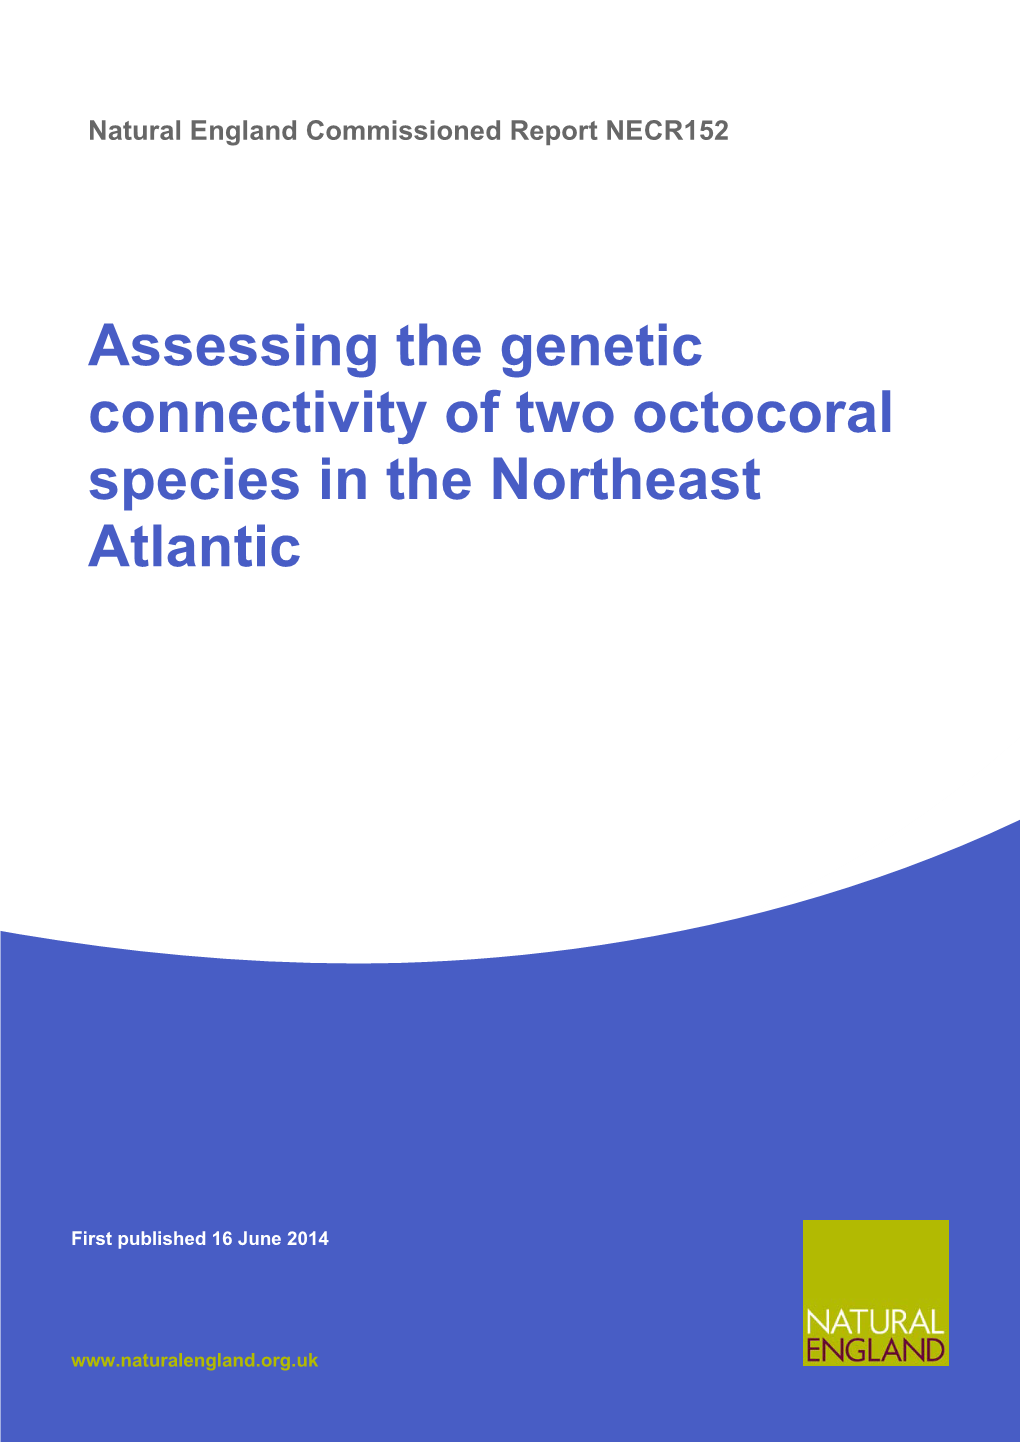 Assessing the Genetic Connectivity of Two Octocoral Species in the Northeast Atlantic